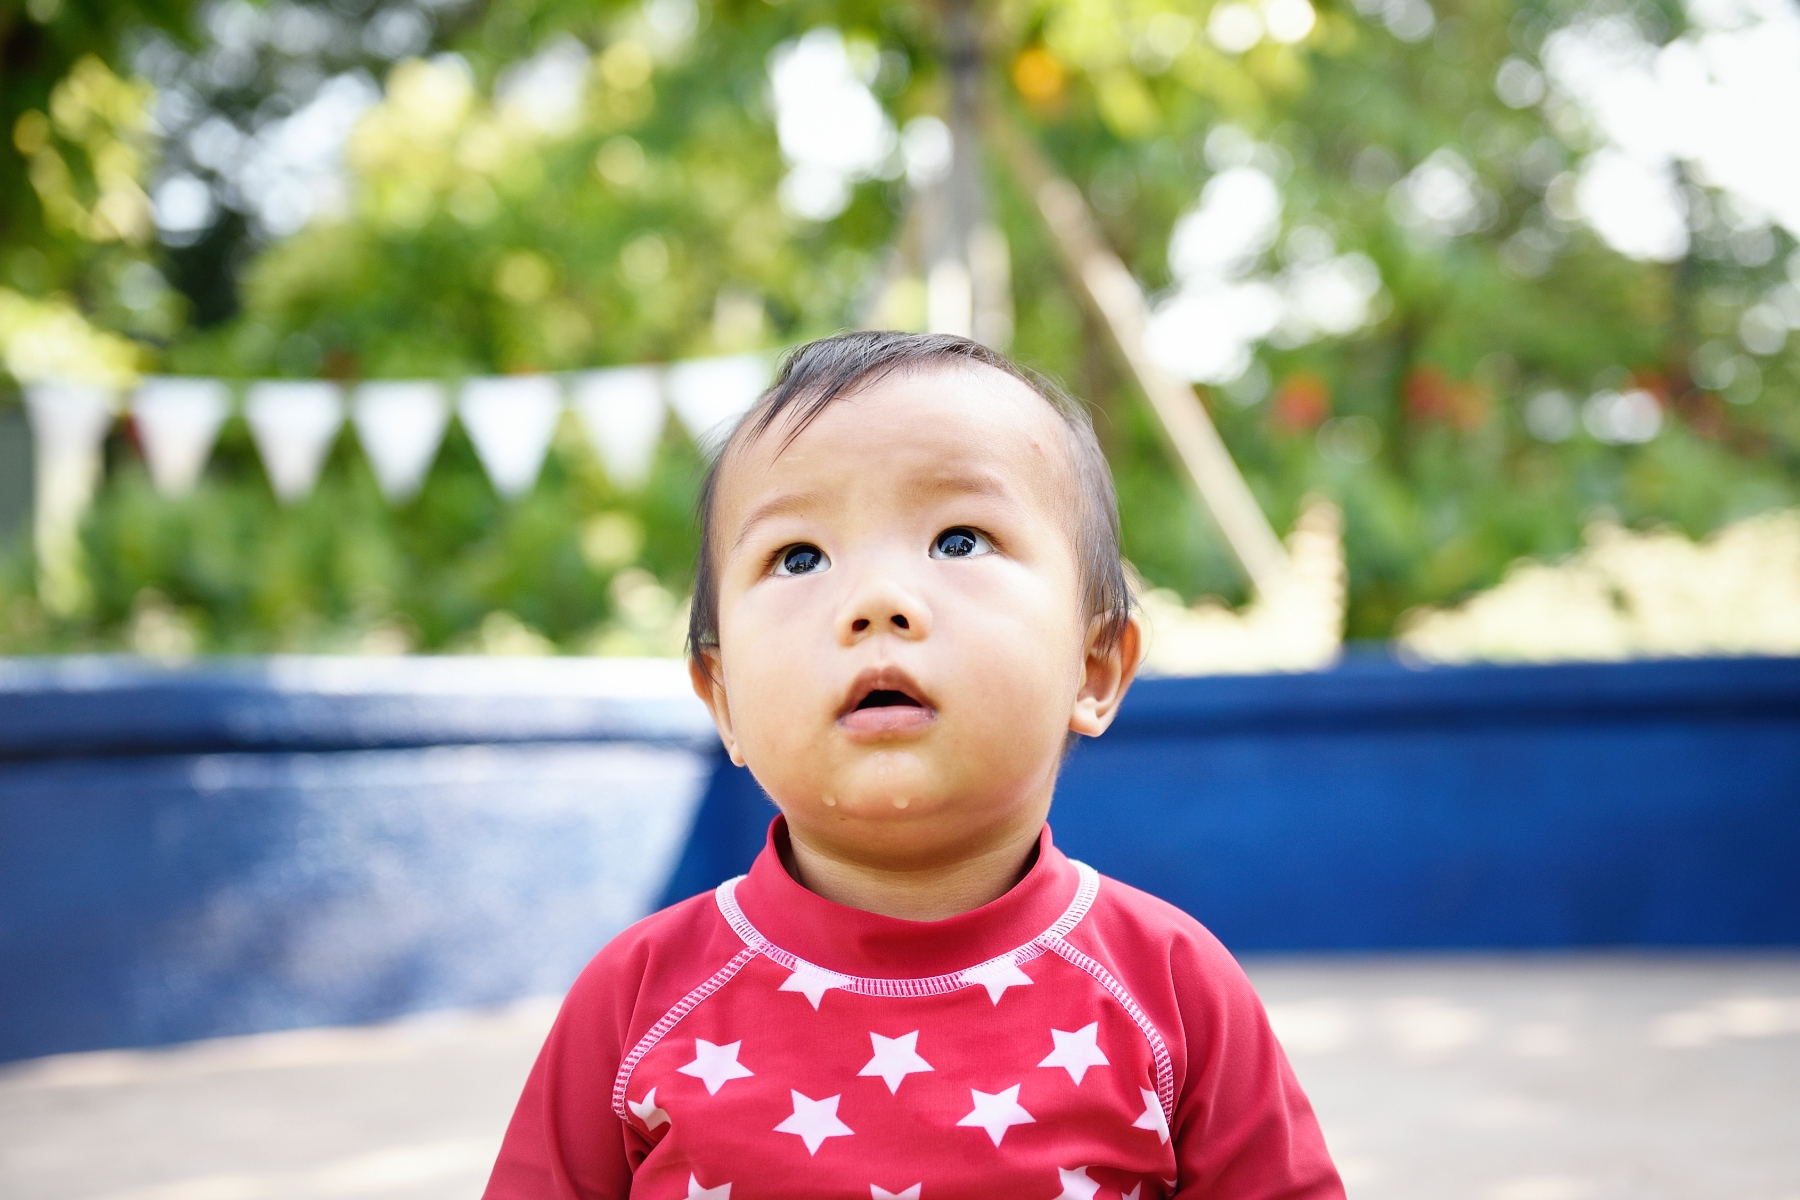 Close-up of baby wearing red top with white stars with mouth dropping open